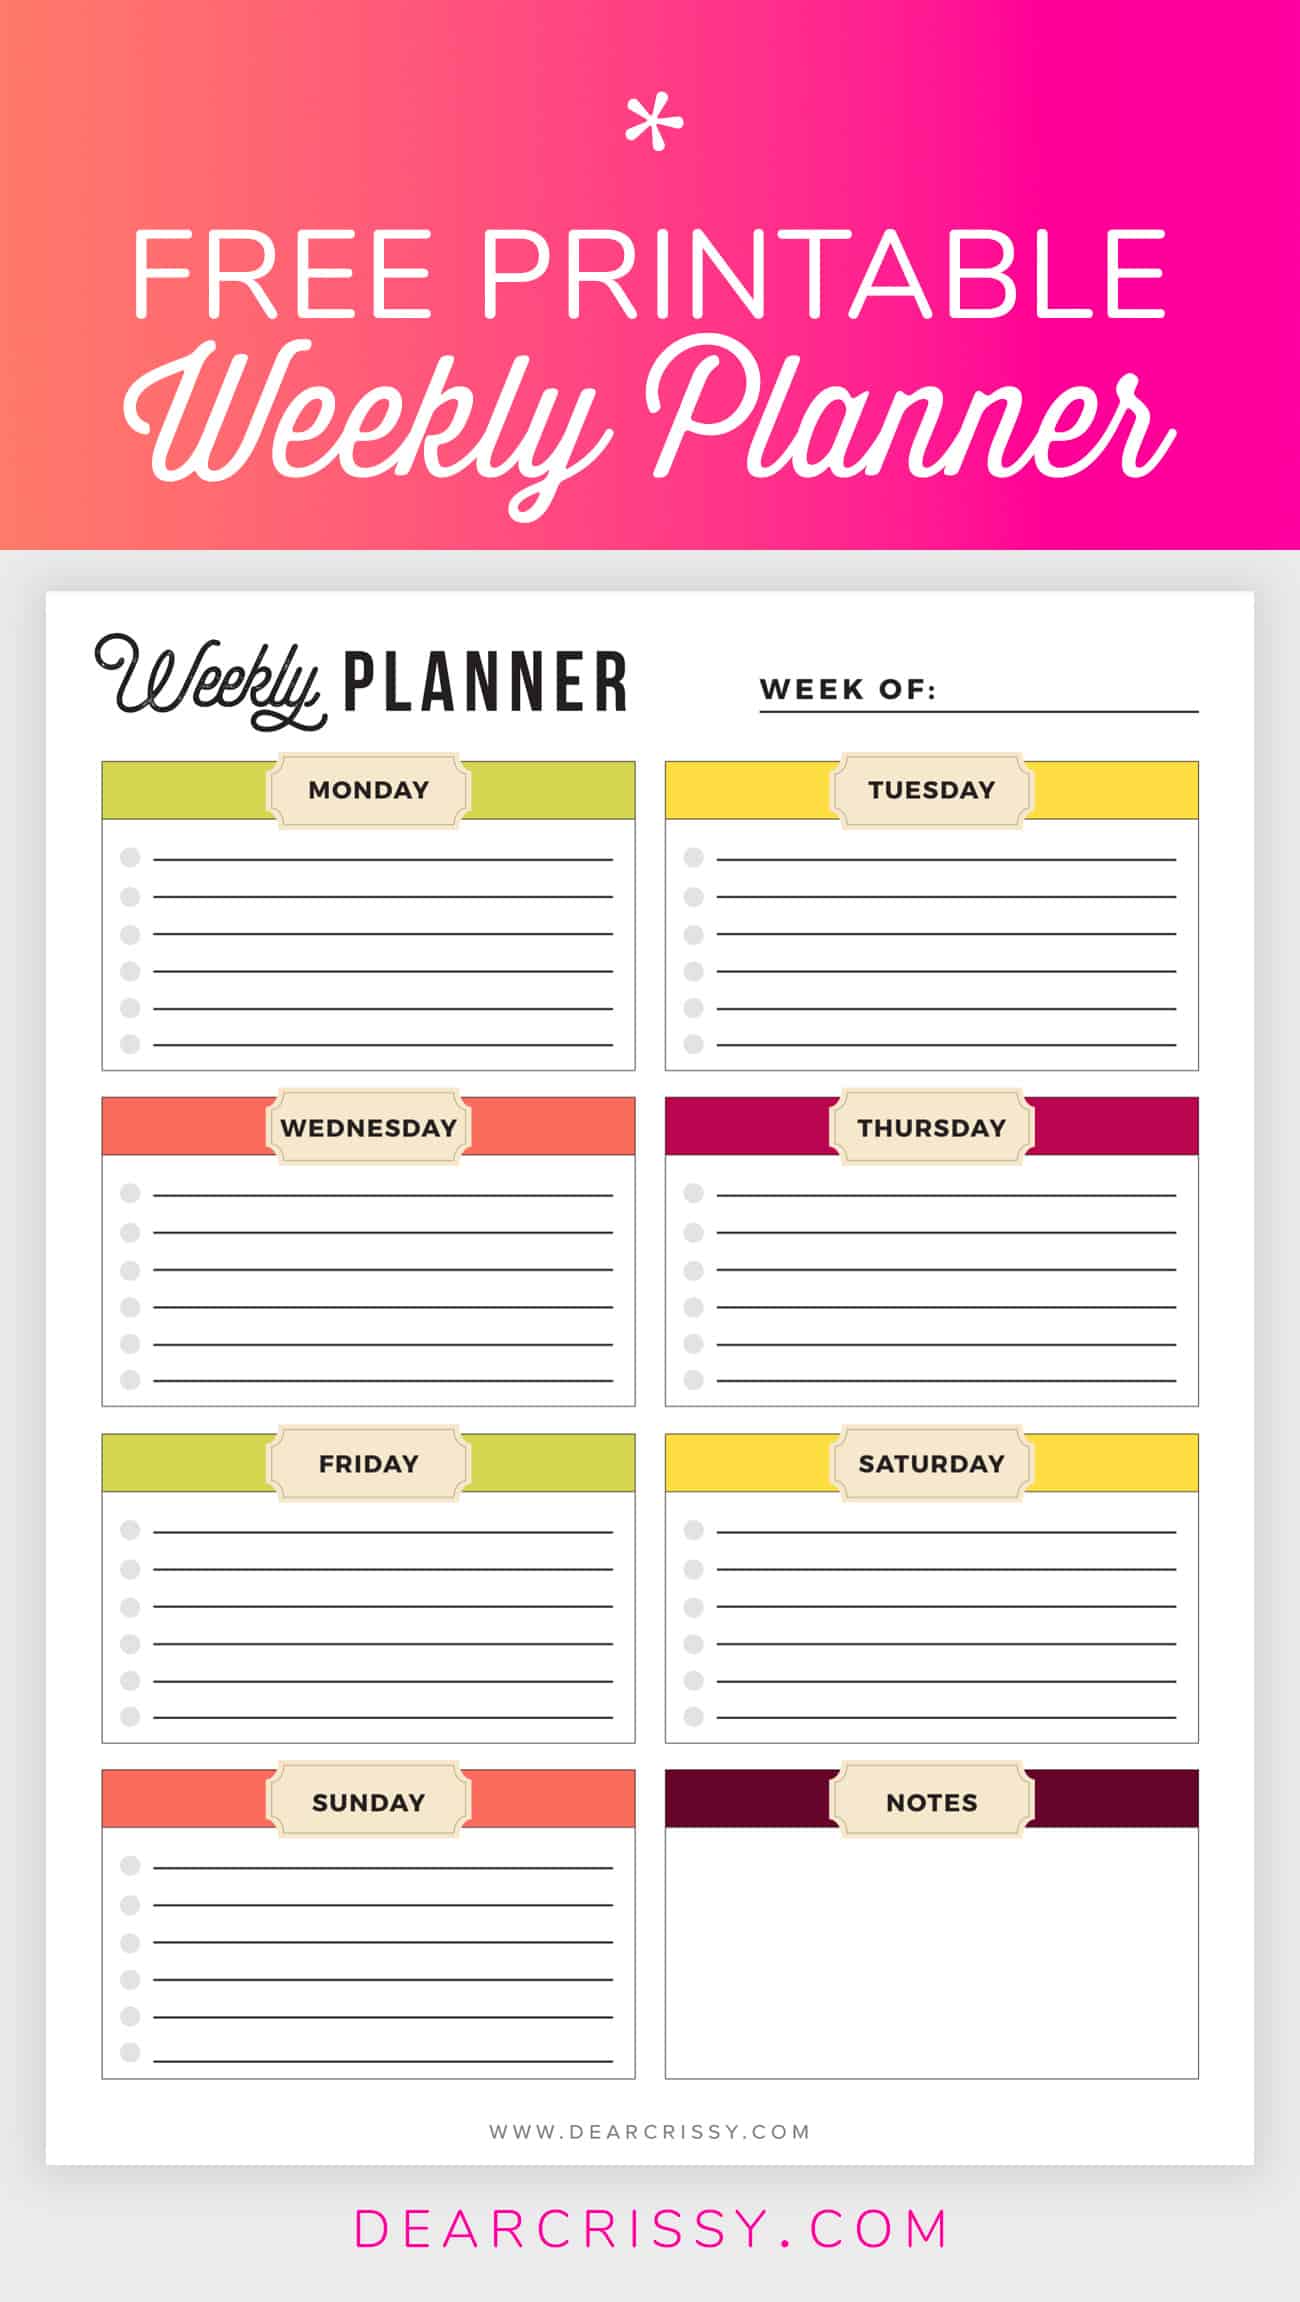 11-free-printable-planners-to-help-get-your-life-together